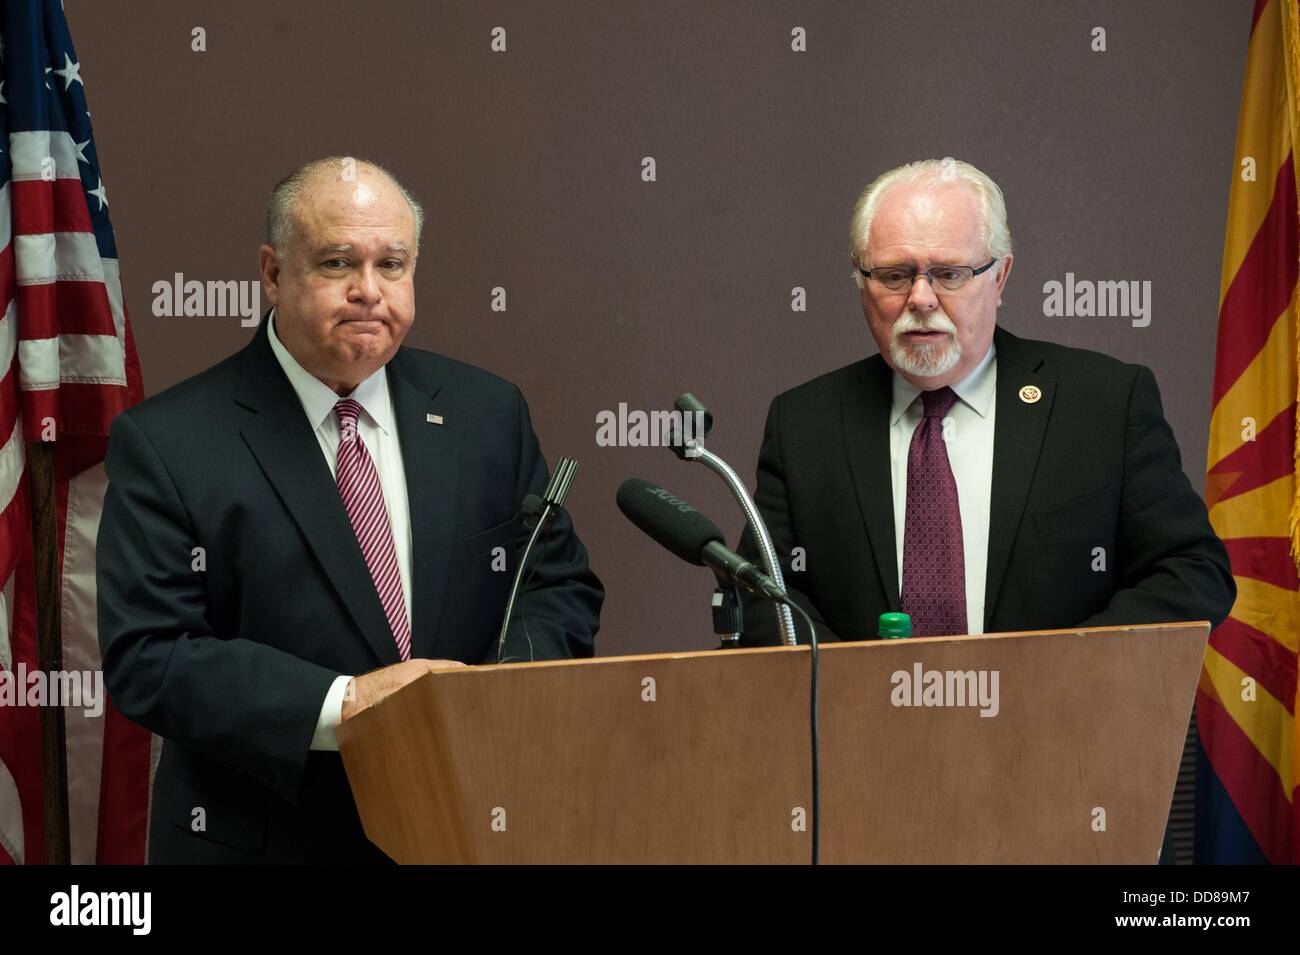 Tucson, Arizona, USA. 28th Aug, 2013. Under Secretary of the Army JOSEPH WESTPHAL, left, and Rep. RON BARBER (D-Ariz.), right, are in Barber's Southern Arizona district to tour military facilities and defense contractor plants. The men held a press conference at Tucson International Airport in Tucson, Ariz. after Westphal's arrival. Barber said he is leading Westphal's tour to make sure Westphal has an understanding of the importance of the military in Barber's district. Westphal said at this point there are no Administration plans for base realignment and closure programs becaus Stock Photo